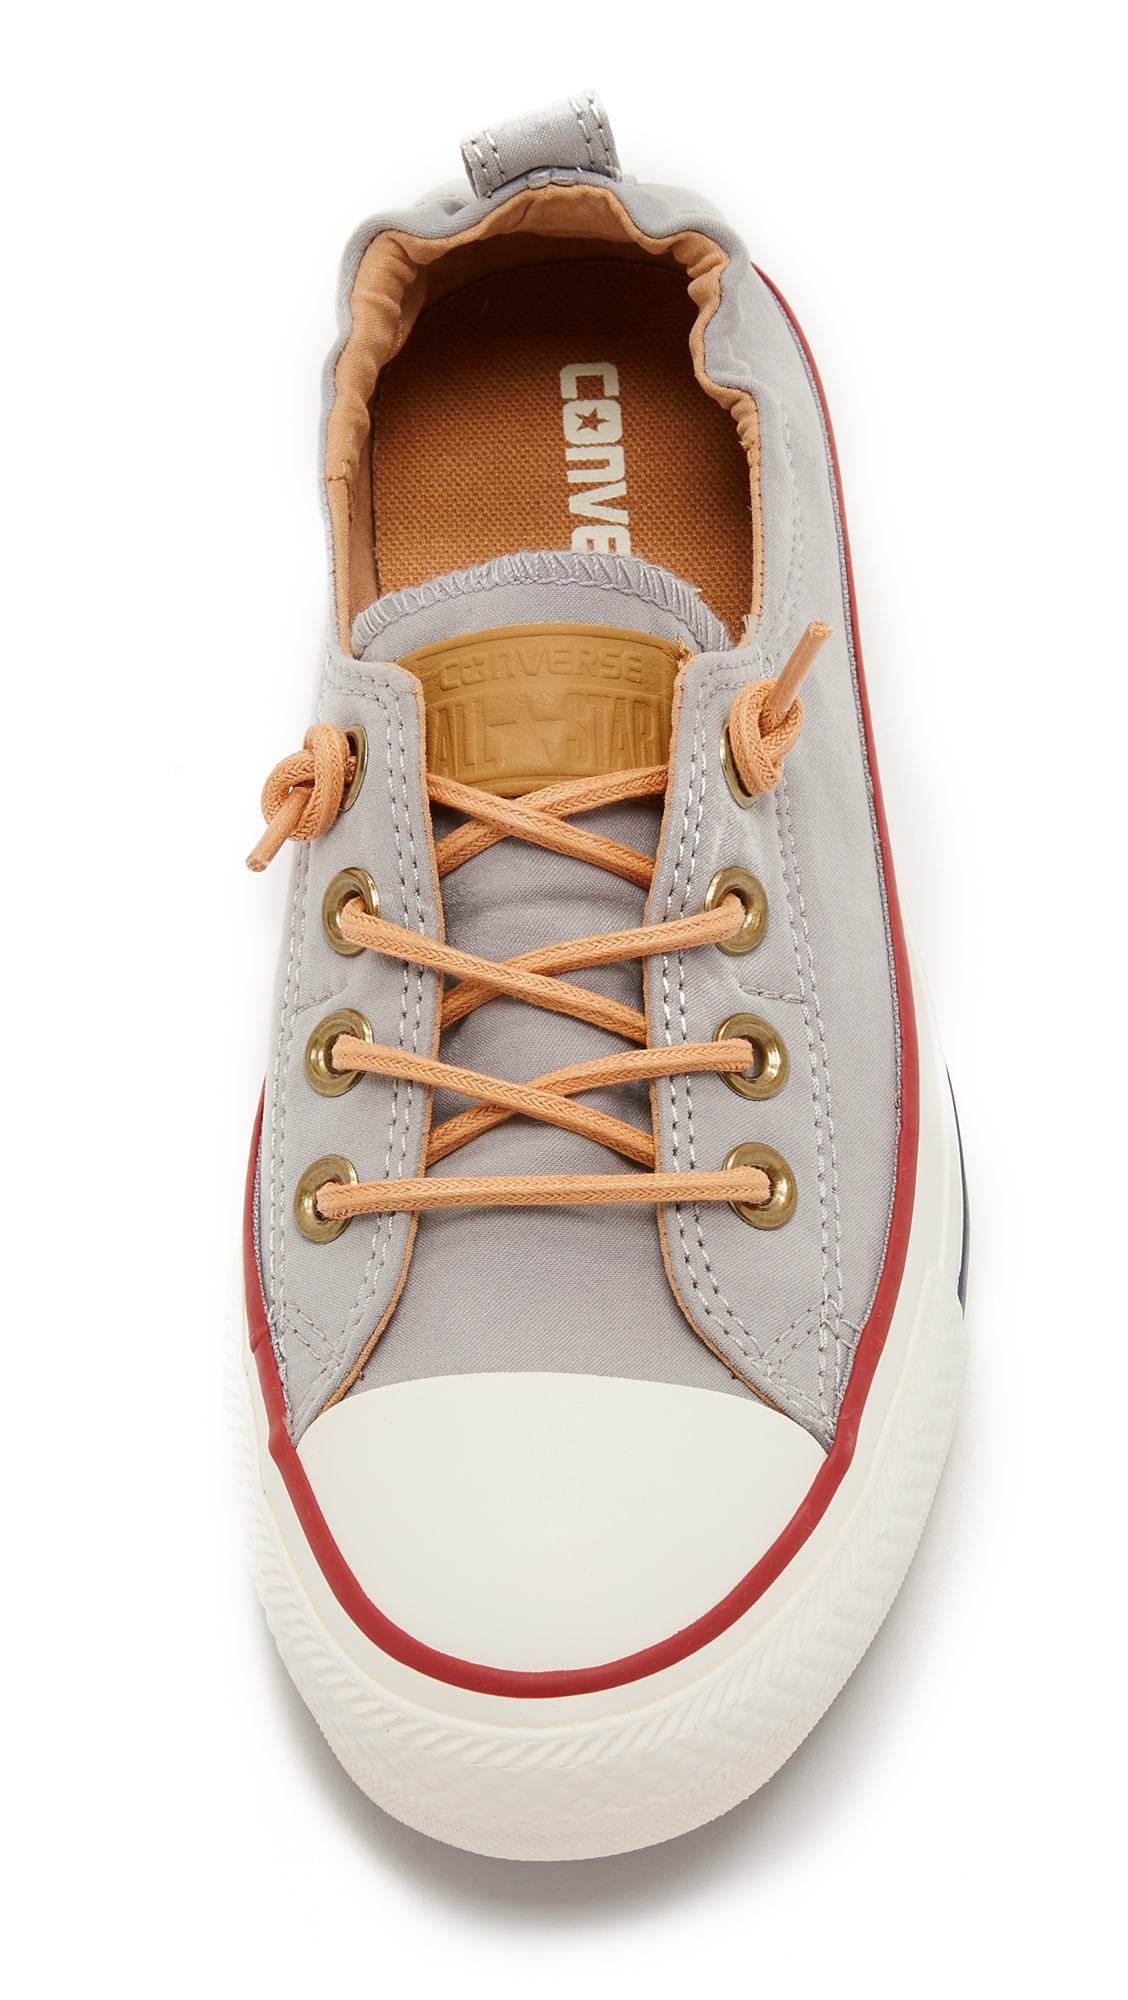 Converse Chuck Taylor All Star Shoreline Sneakers - White/biscuit/egret in  Gray | Lyst